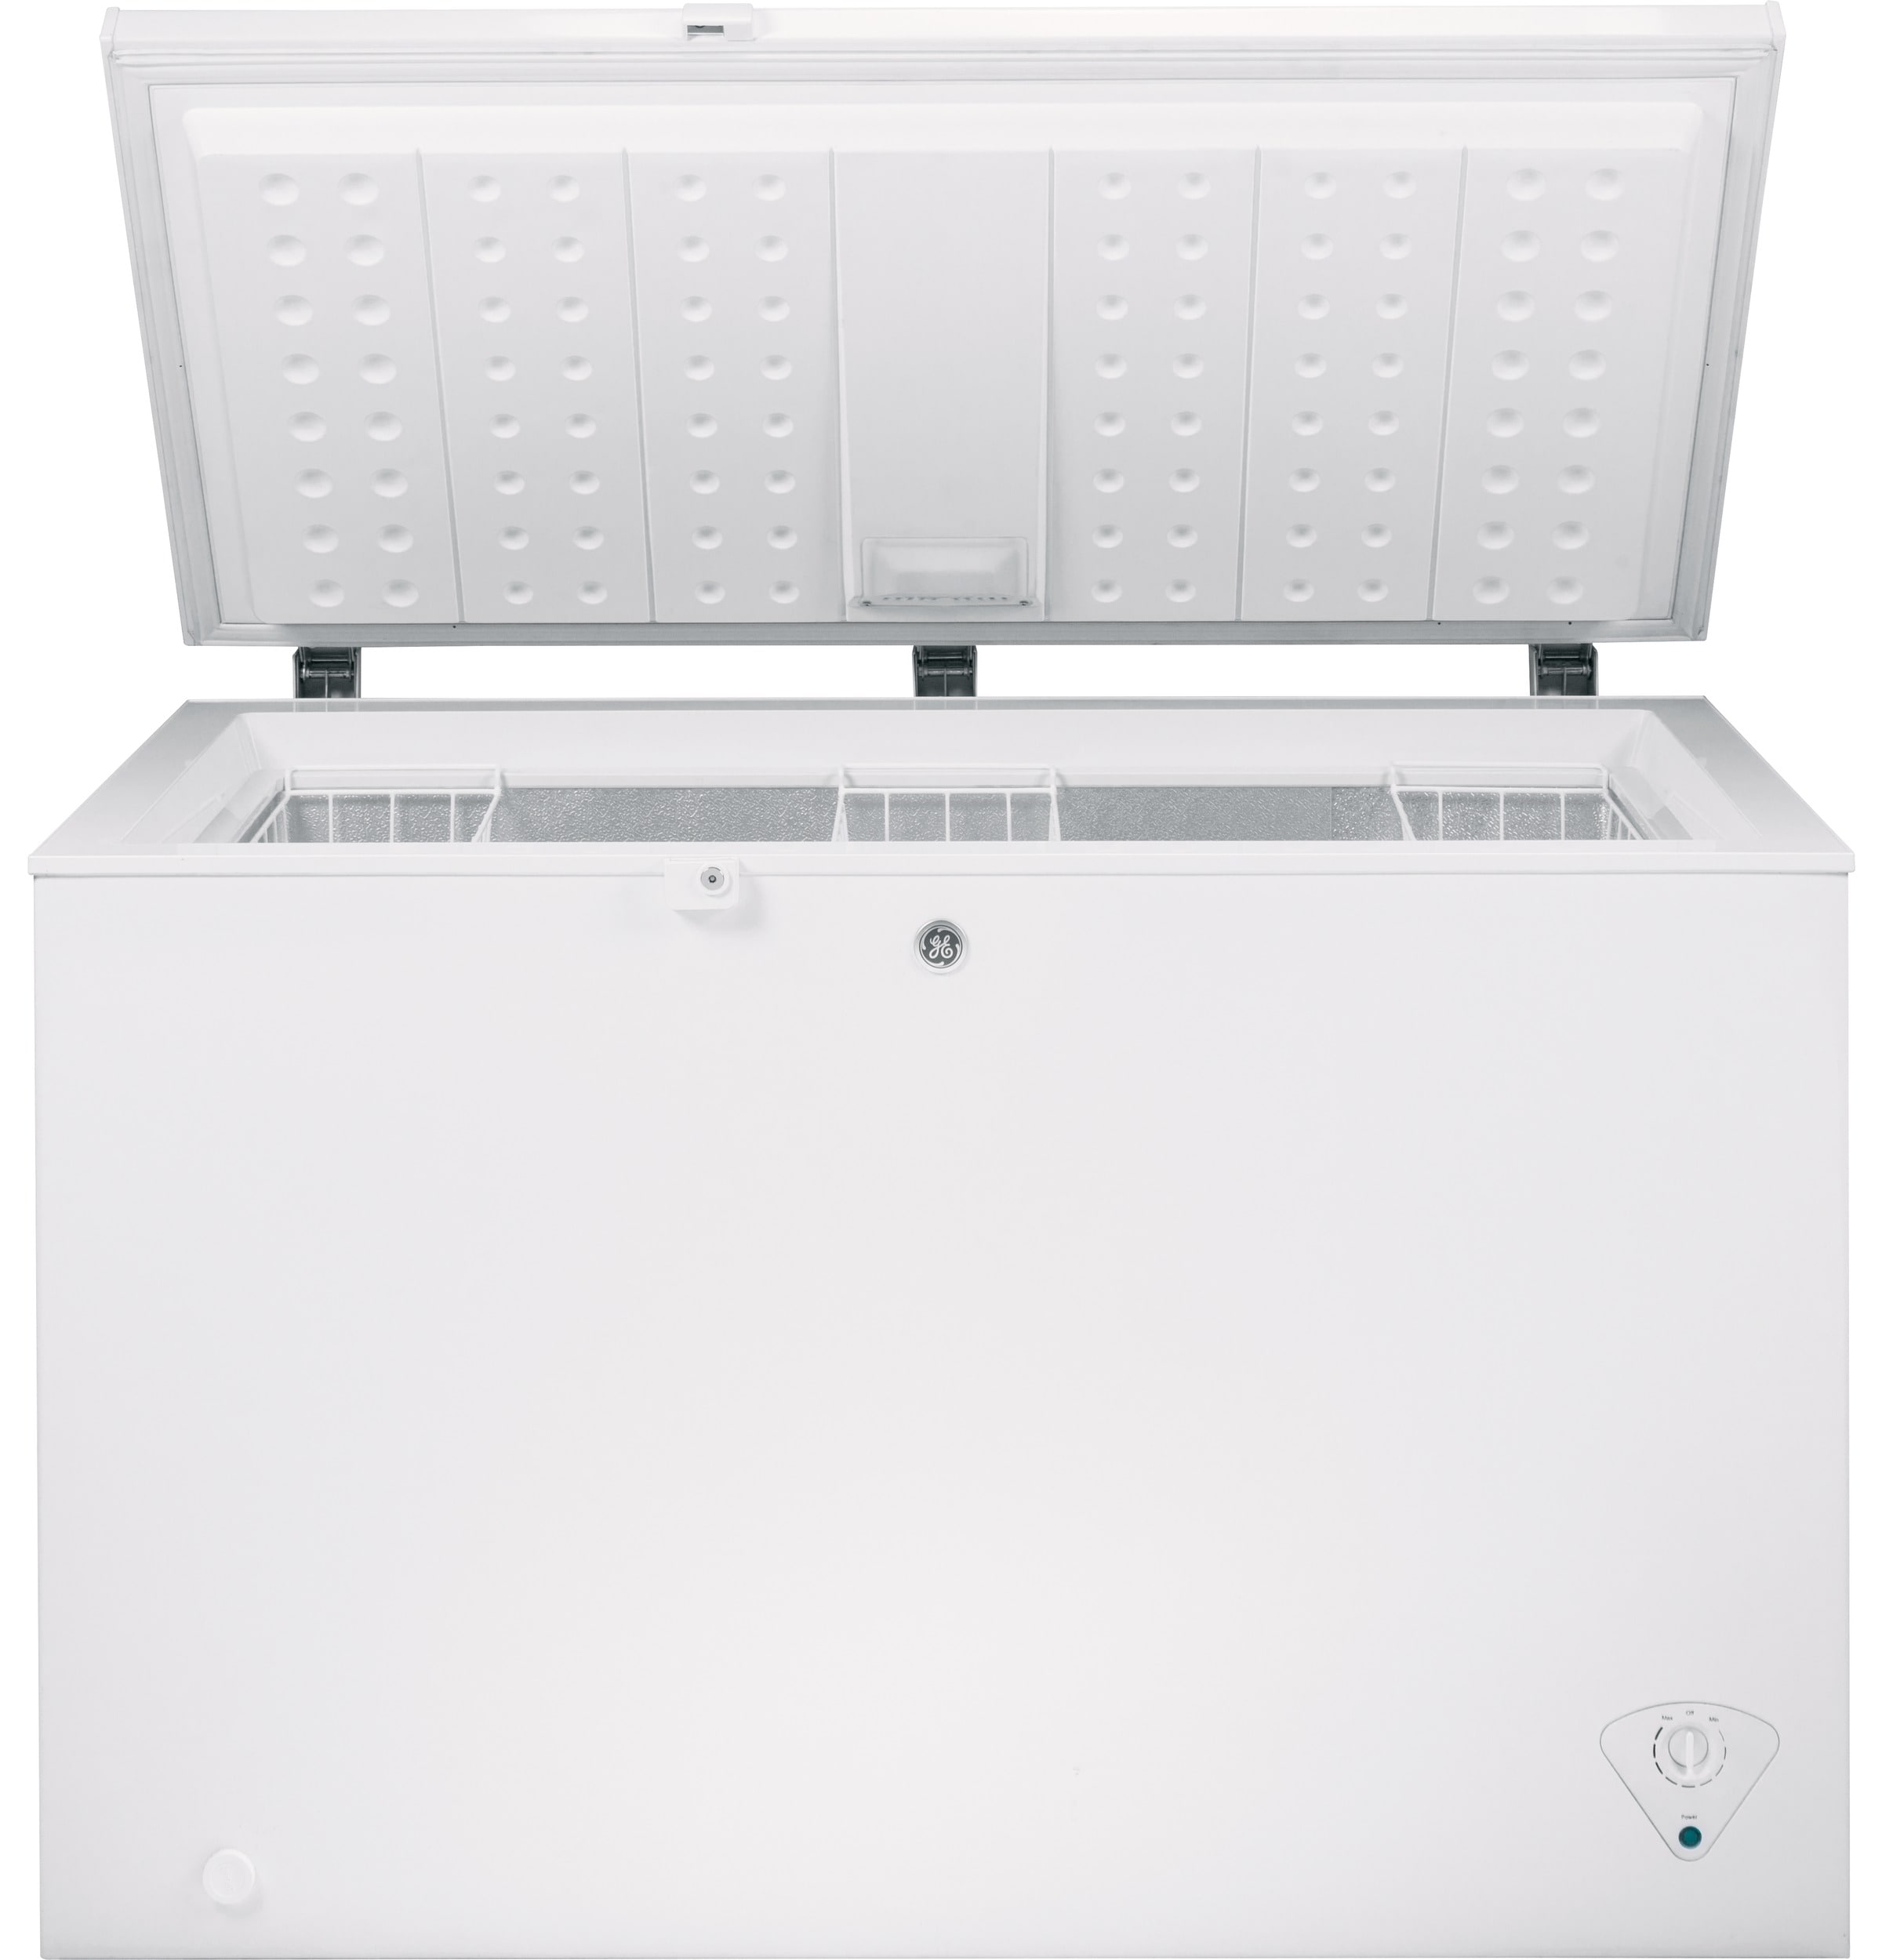 GE Garage Ready 10.6-cu ft Manual Defrost Chest Freezer (White